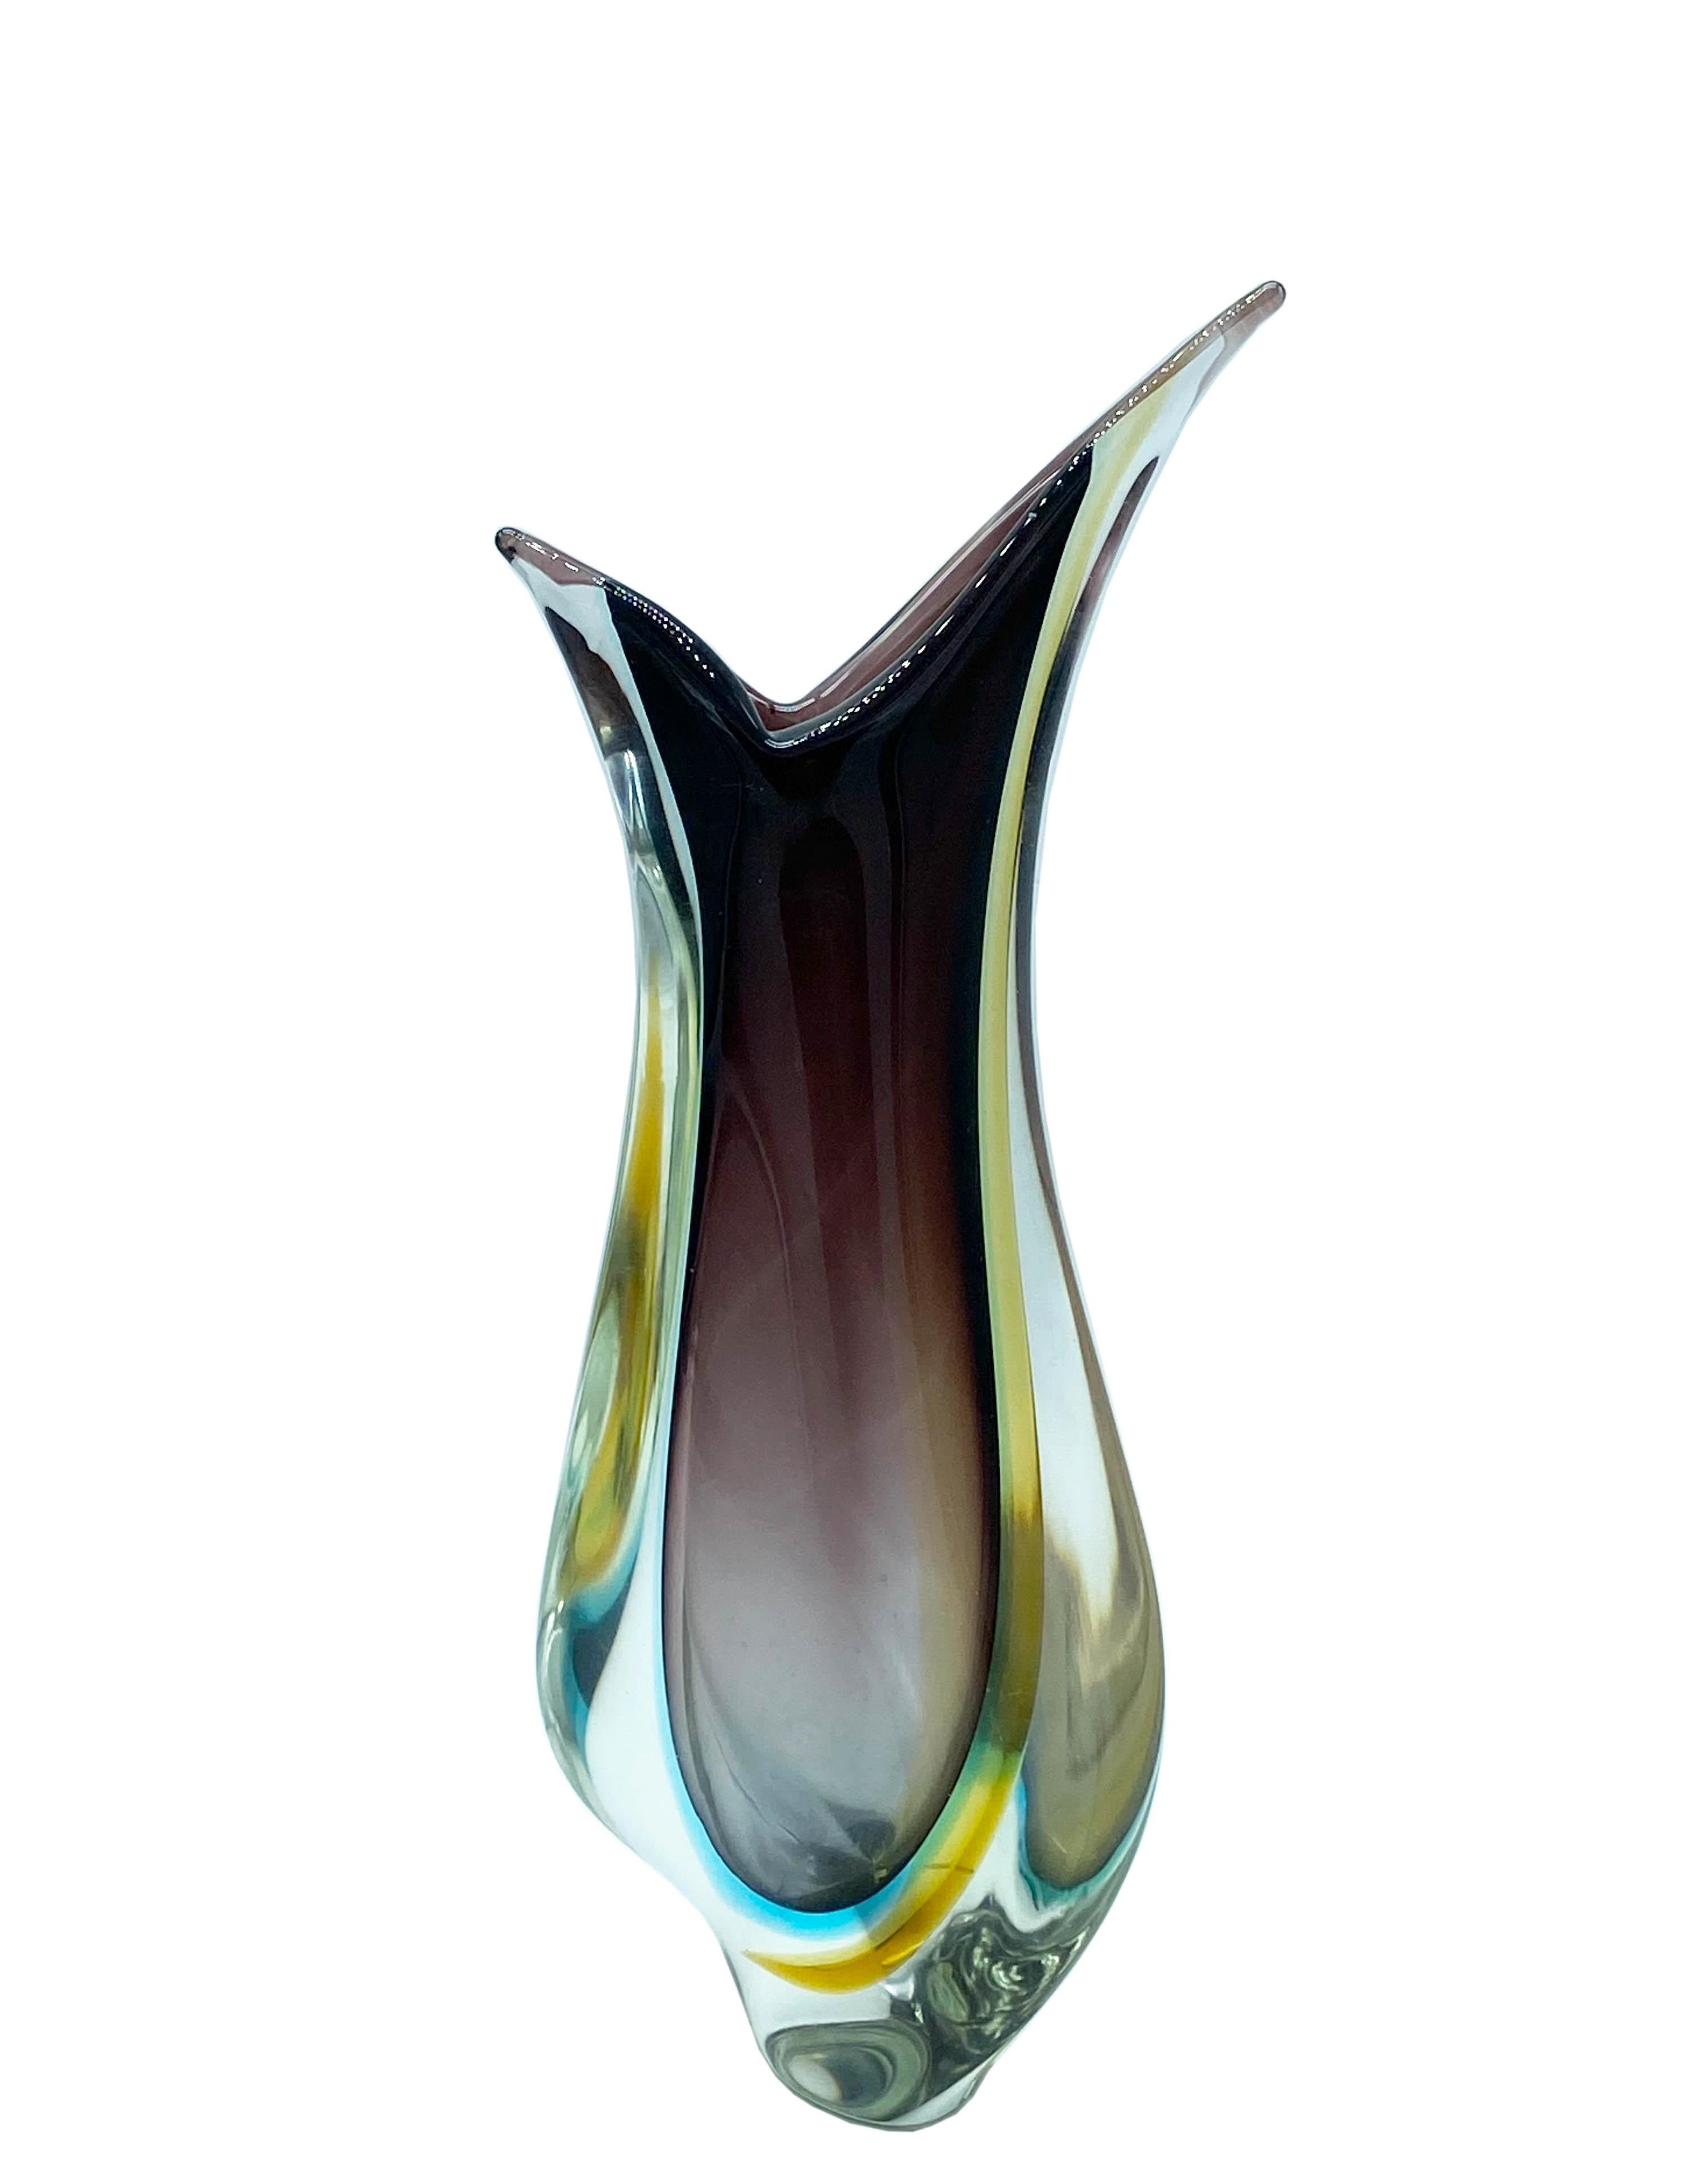 Glass vase by Flavio Poli for Seguso 1950. Made on the island of Murano, Venice, Italy. In a beautiful combination of purple glass encased in glass , which is further enclosed in clear glass, using the renowned Venetian sommerso technique.